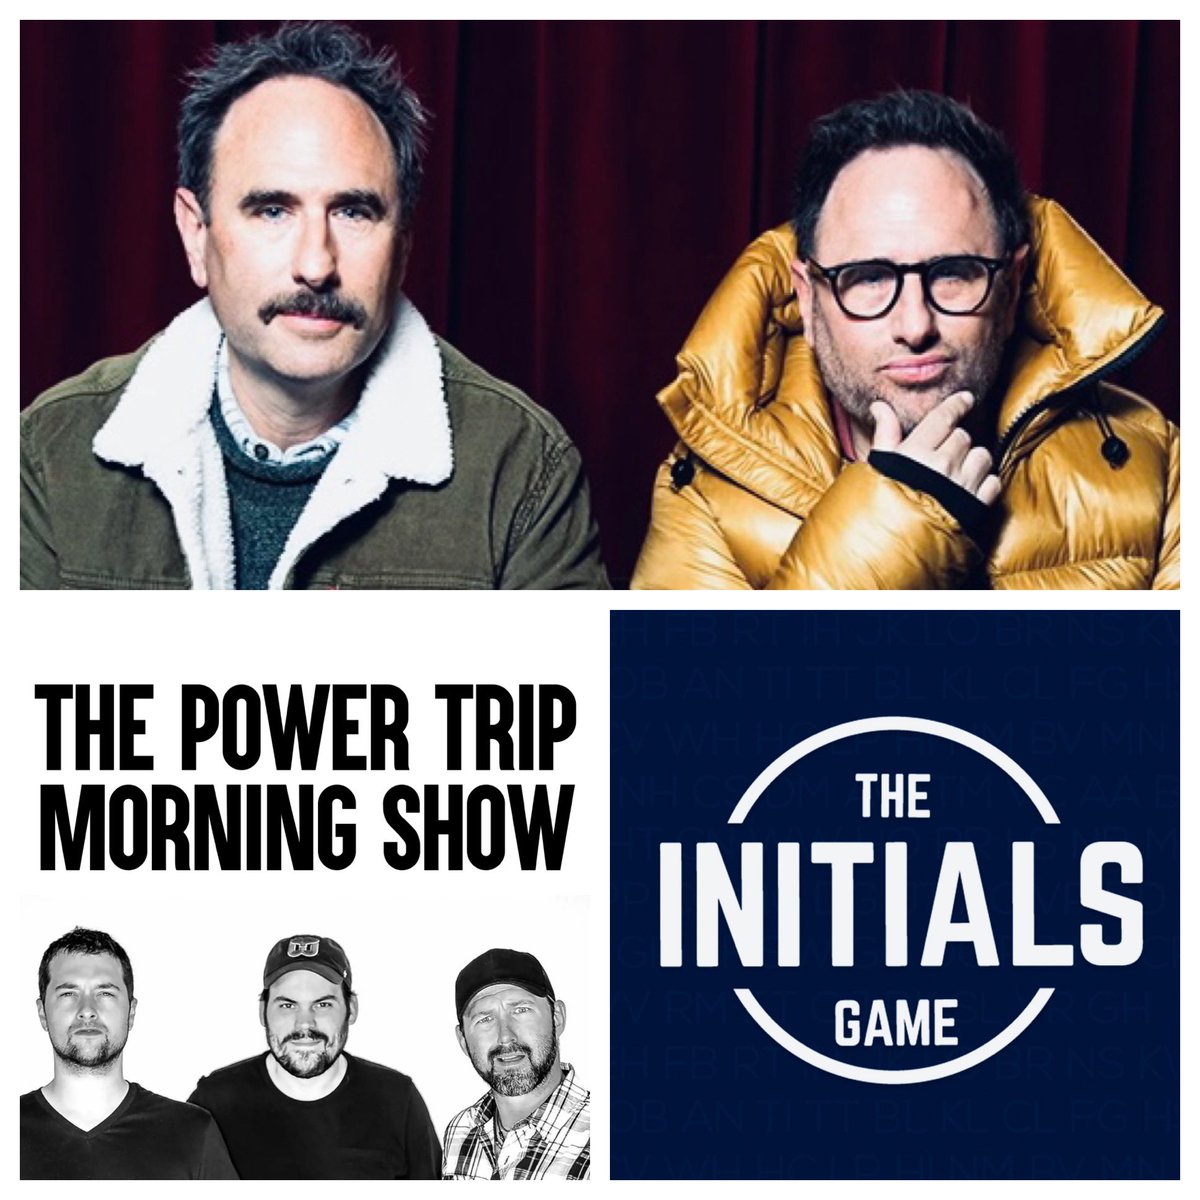 THIS MORNING: The @SklarBrothers join the @PowerTripKFAN starting around 7:30 then play @InitialsGame #510 at 8:15. TUNE IN NOW: KFAN.com/listen